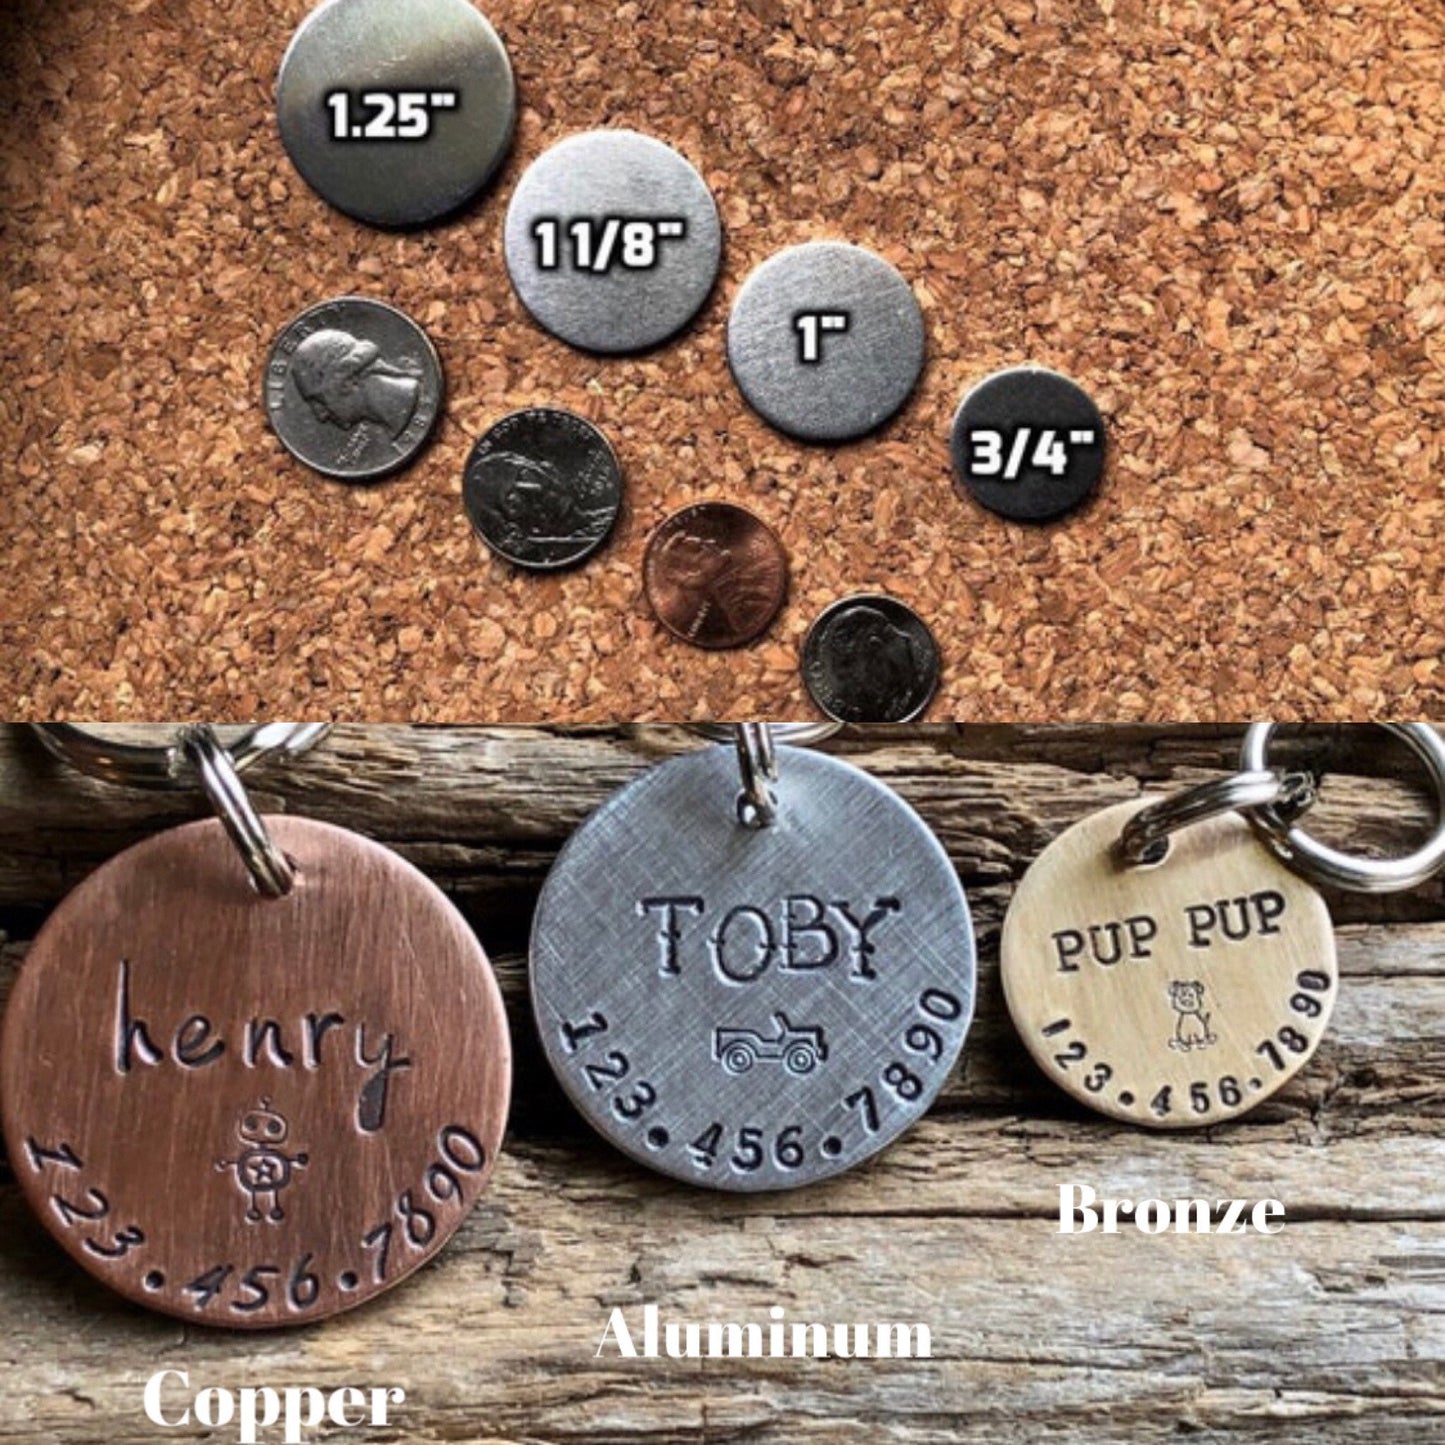 Hand Stamped Dog ID Tag, Pet Id Tag, Tag for Dog, Puppy Tag, Tag with Paw Print, Large Dog Tag, Pet ID, Identification Tag